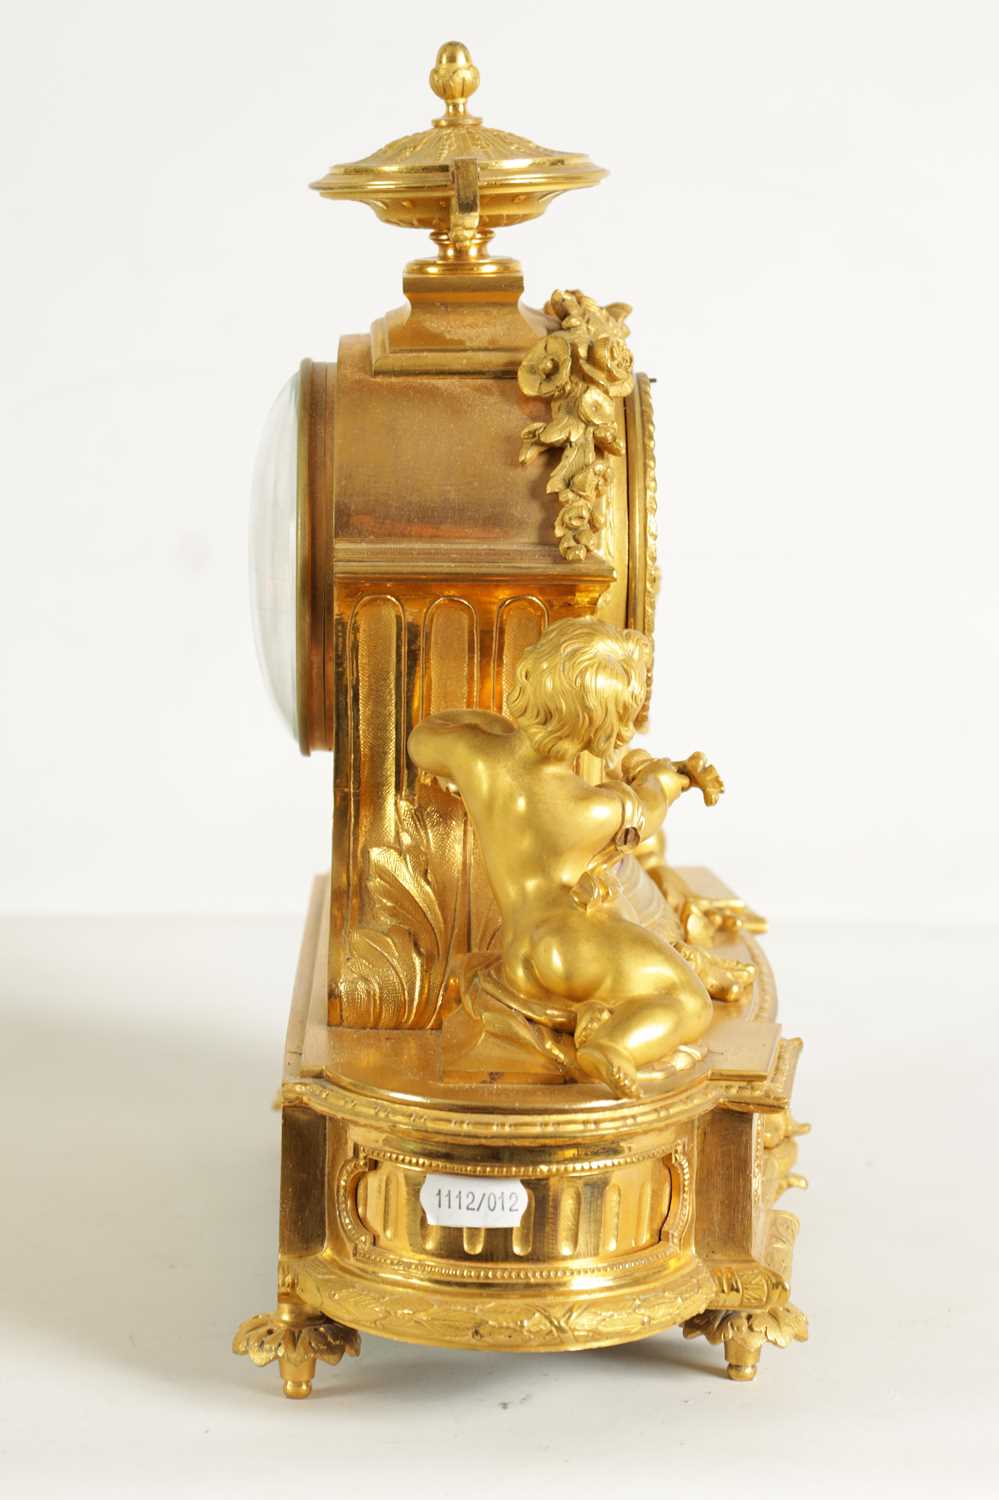 A LATE 19TH CENTURY FRENCH ORMOLU AND PORCELAIN PANELLED FIGURAL MANTEL CLOCK - Image 7 of 12